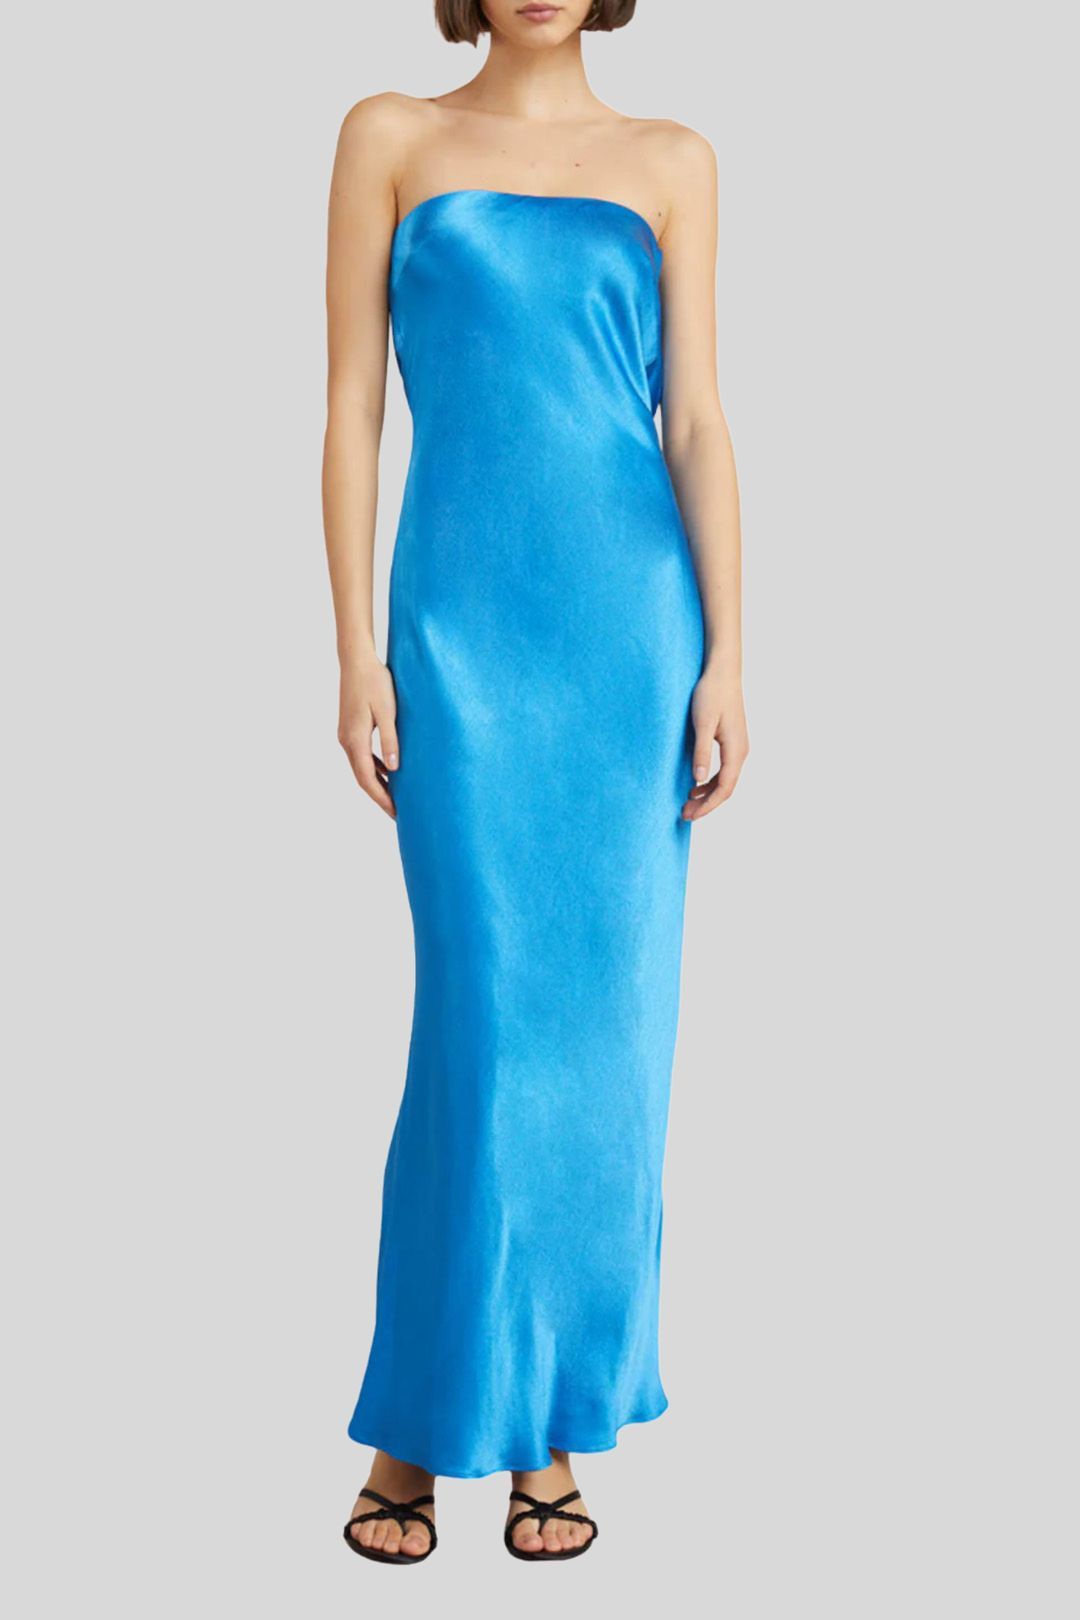 Bec and Bridge Moon Dance Strapless Dress in Blue